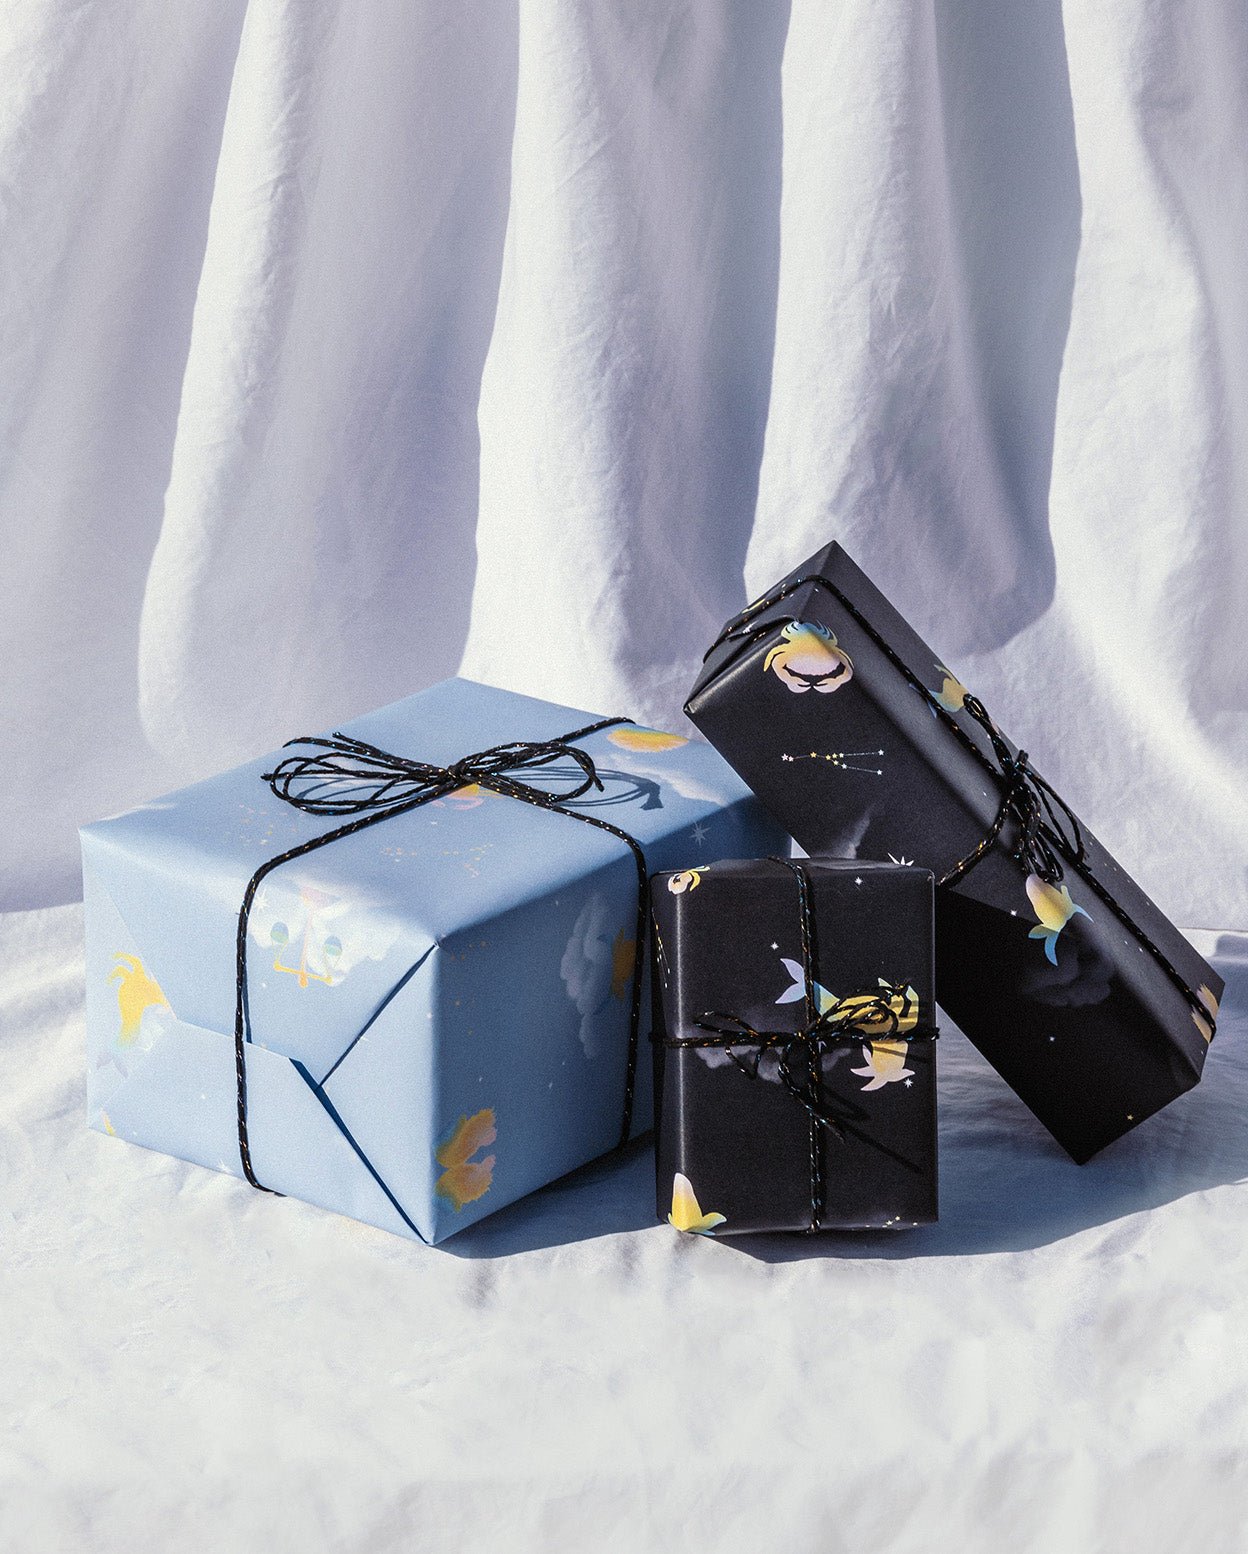 Presents wrapped with "Day" and "Night" horoscope gift wrap tied with black and white string against a fabric white background.